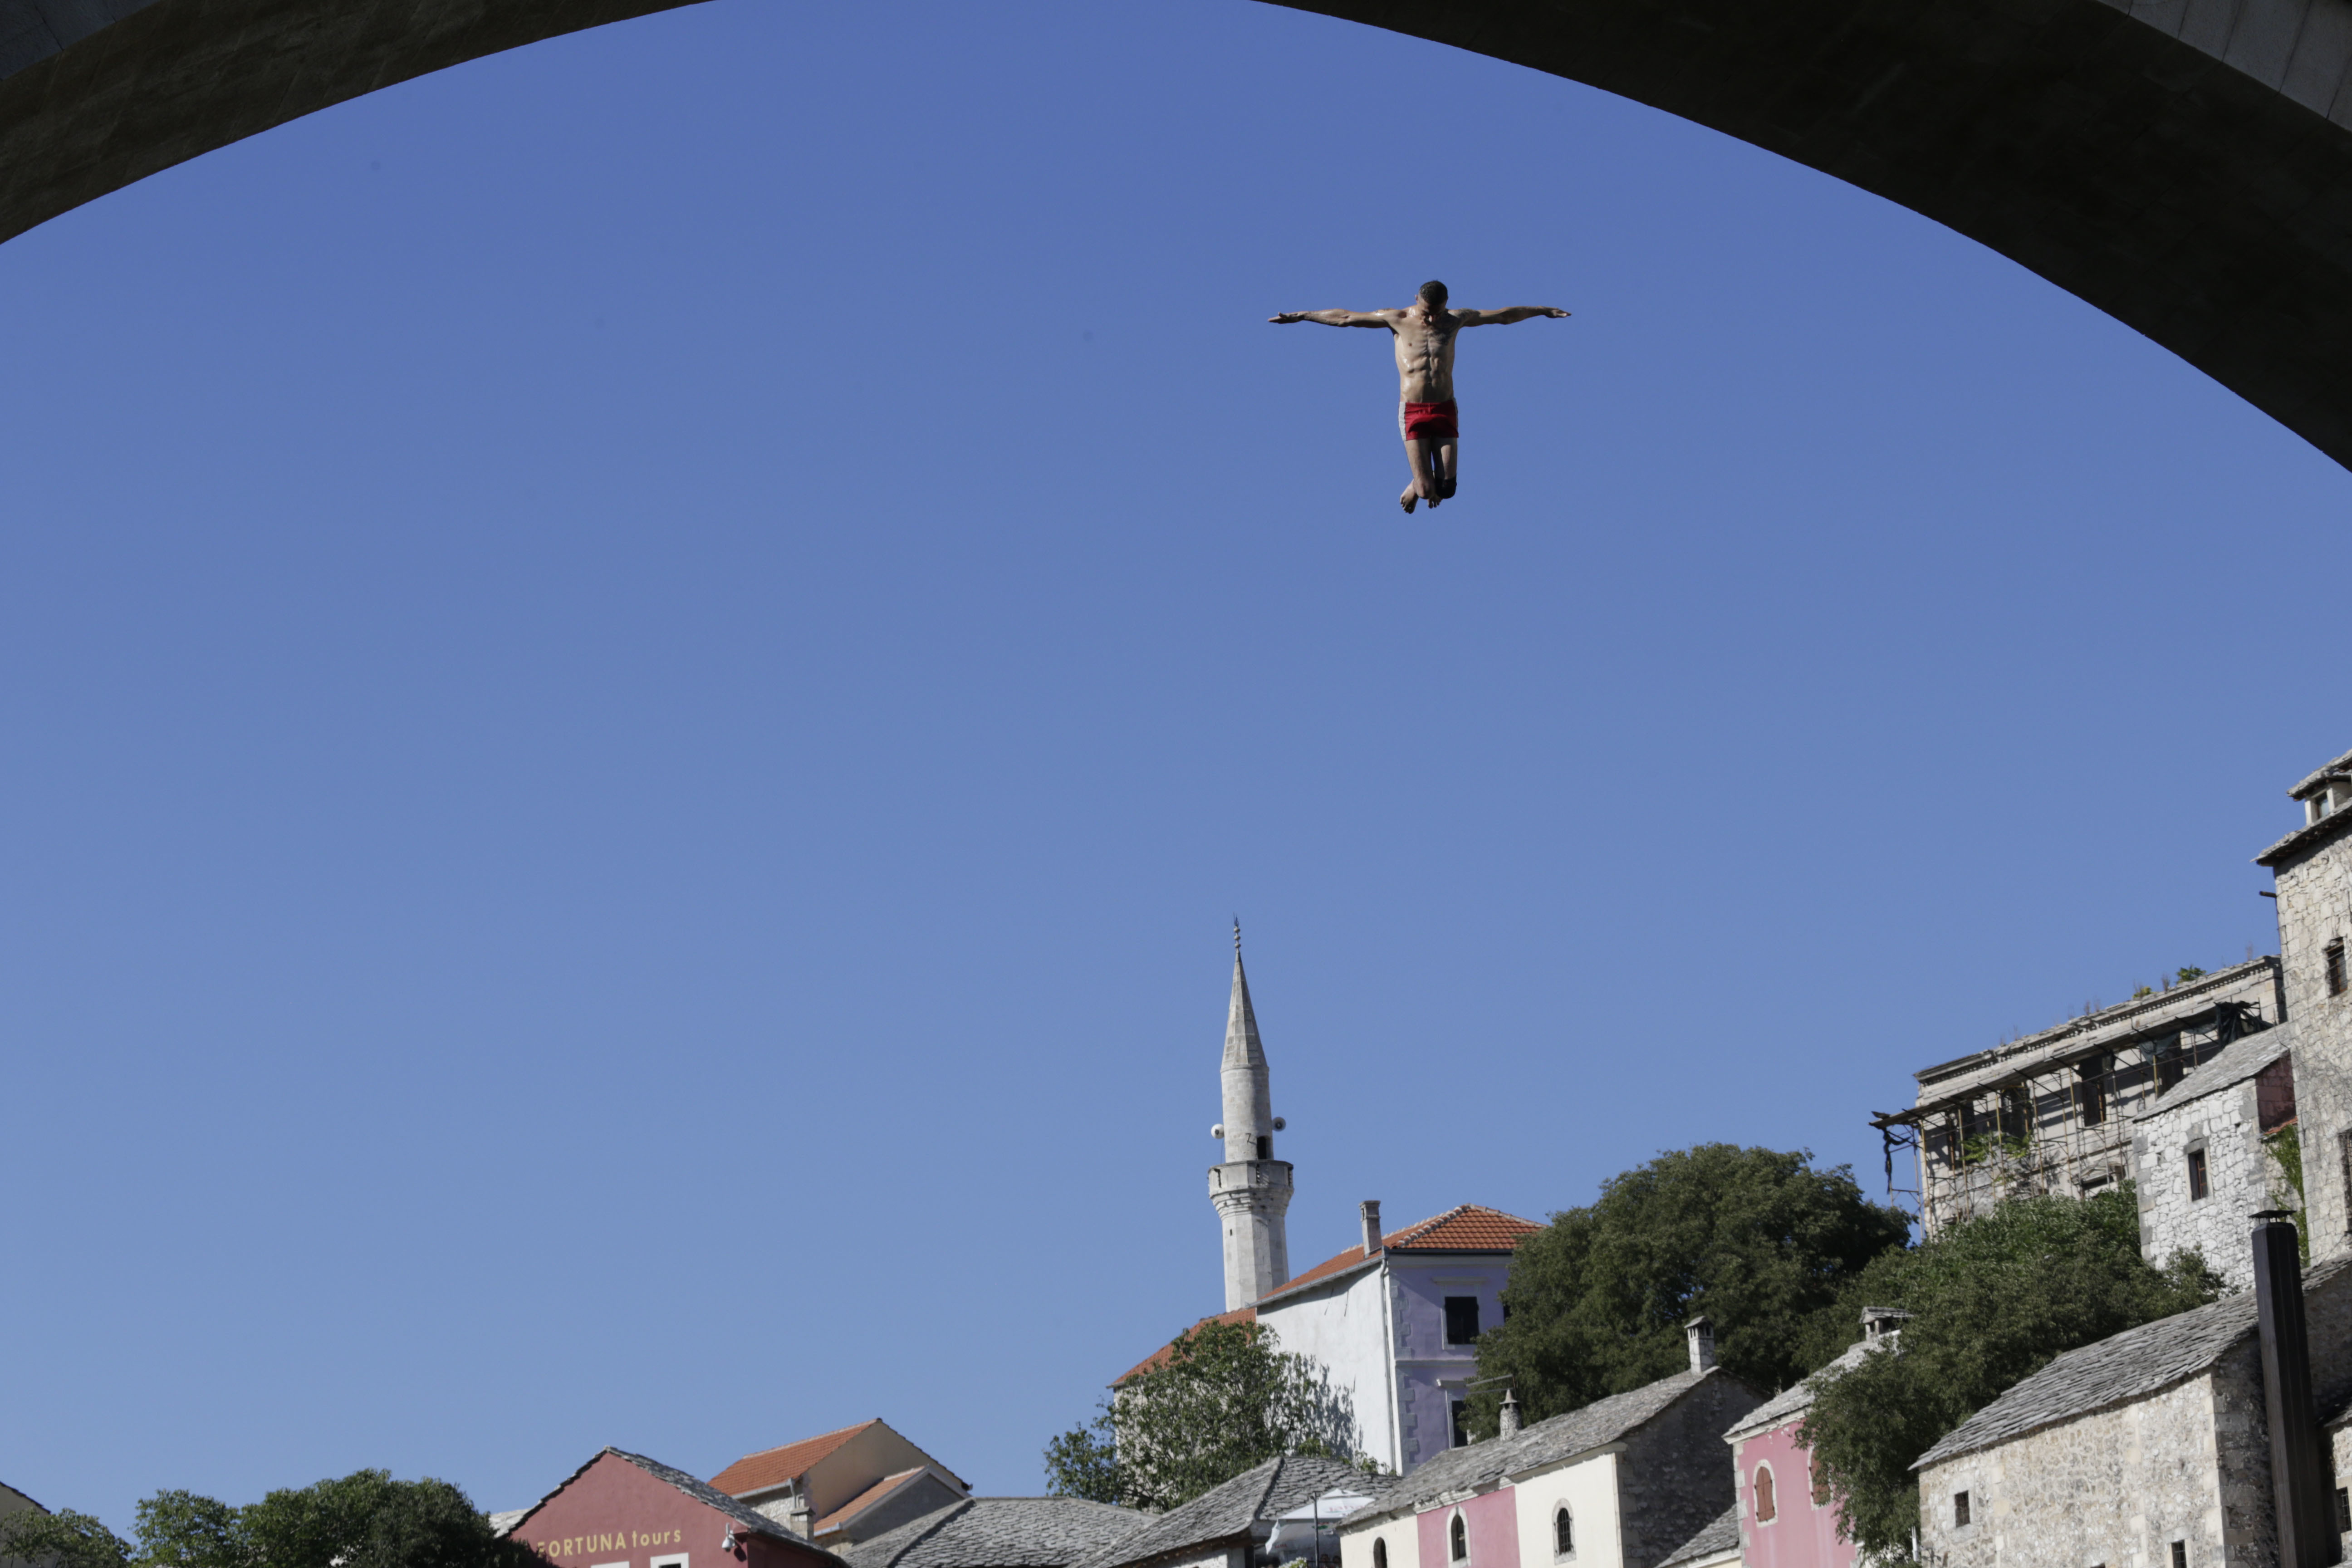 A diver drops through the air from the Mostar bridge during 451th traditional annual high diving competition, in Mostar, 140 kms south of Bosnian capital of Sarajevo, Sunday, July 30, 2017. Total of 41 divers from Bosnia and neighbouring countries competed diving from 25 meters high Old Mostar Bridge into the Neretva river. (AP Photo/Amel Emric)